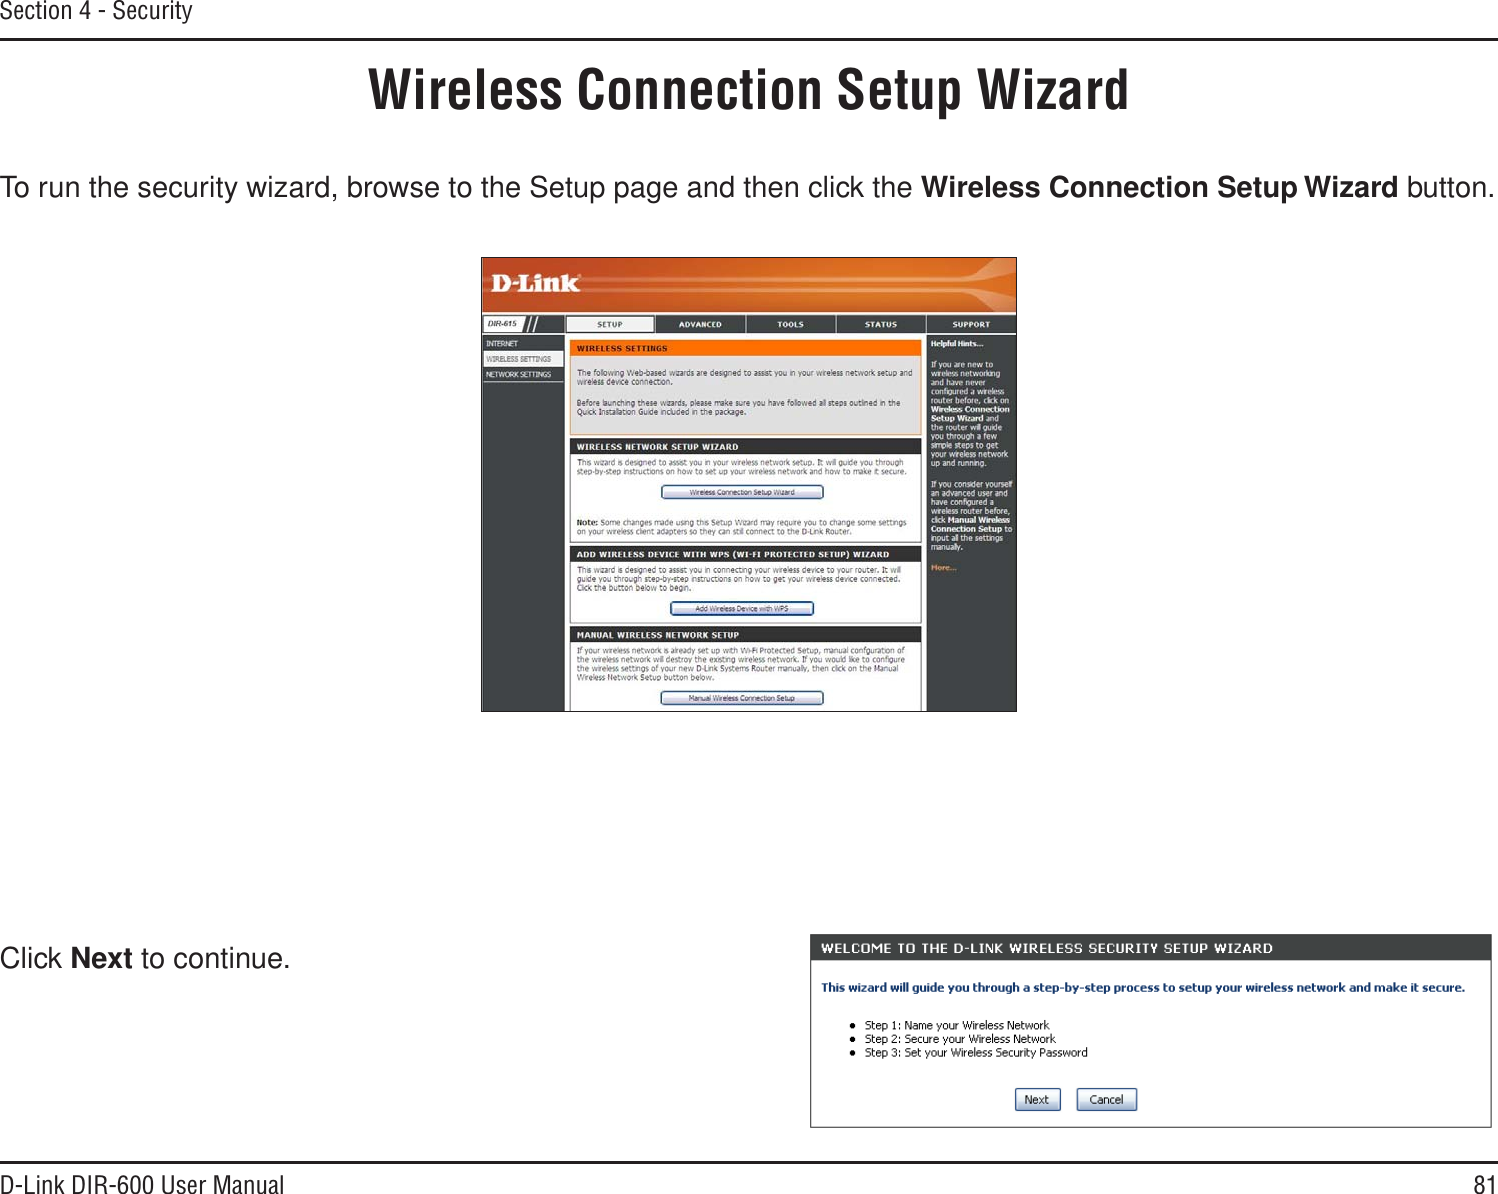 81D-Link DIR-600 User ManualSection 4 - SecurityWireless Connection Setup WizardTo run the security wizard, browse to the Setup page and then click the Wireless Connection Setup Wizard button. Click Next to continue.